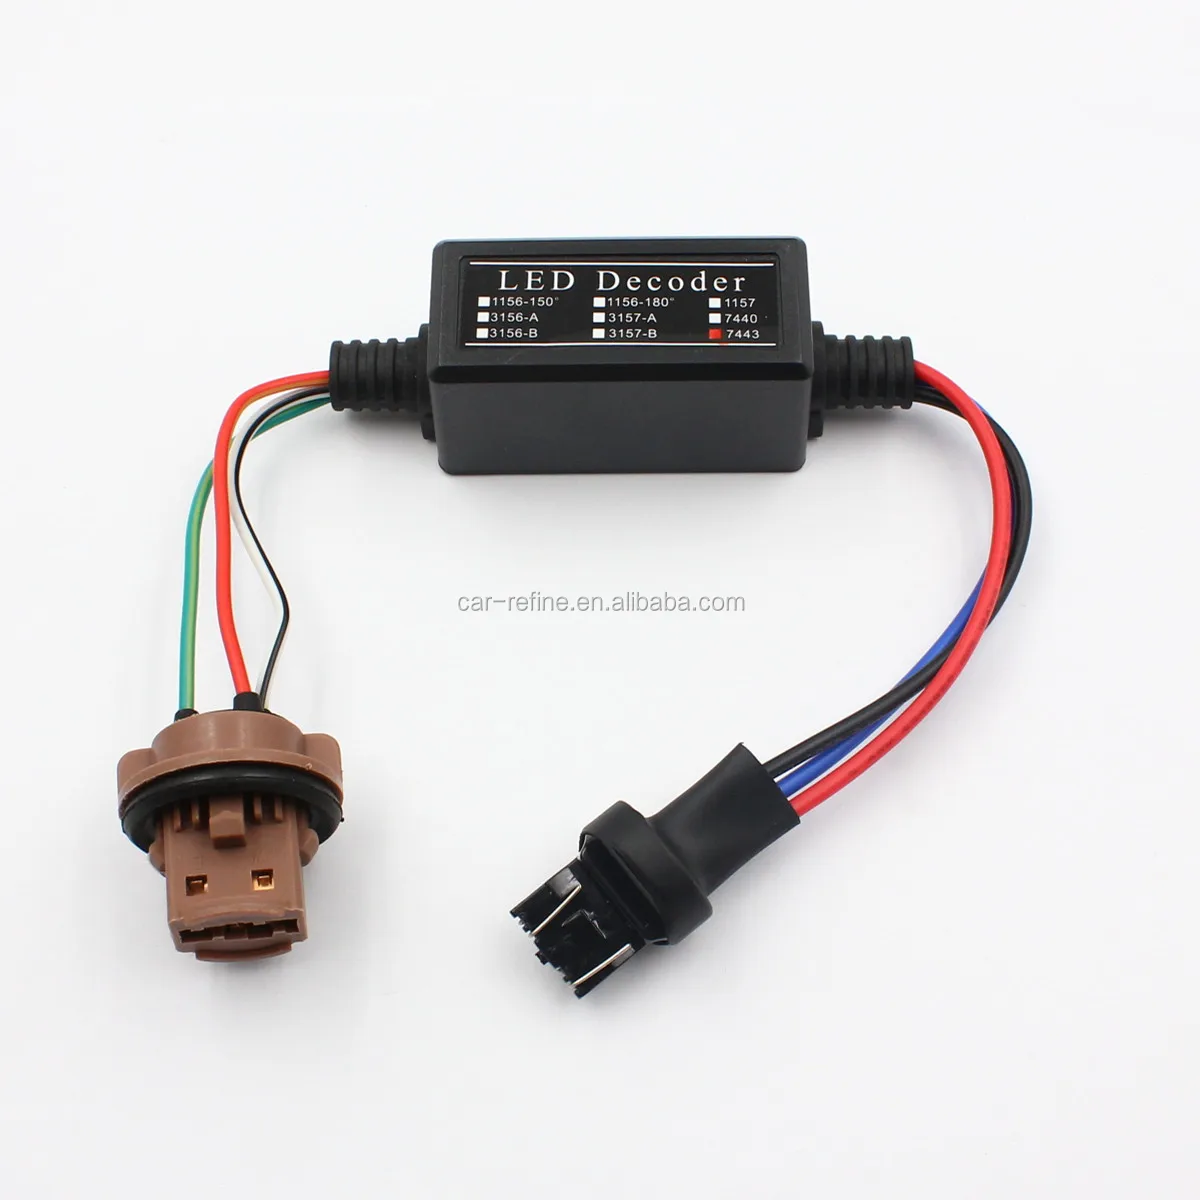 Wholesale Car Lights Error Free Decoder for T20 7443 W21/5W LED Headlights DRL Signal Brake Lamps 7443 LED fog canceller From m.alibaba.com